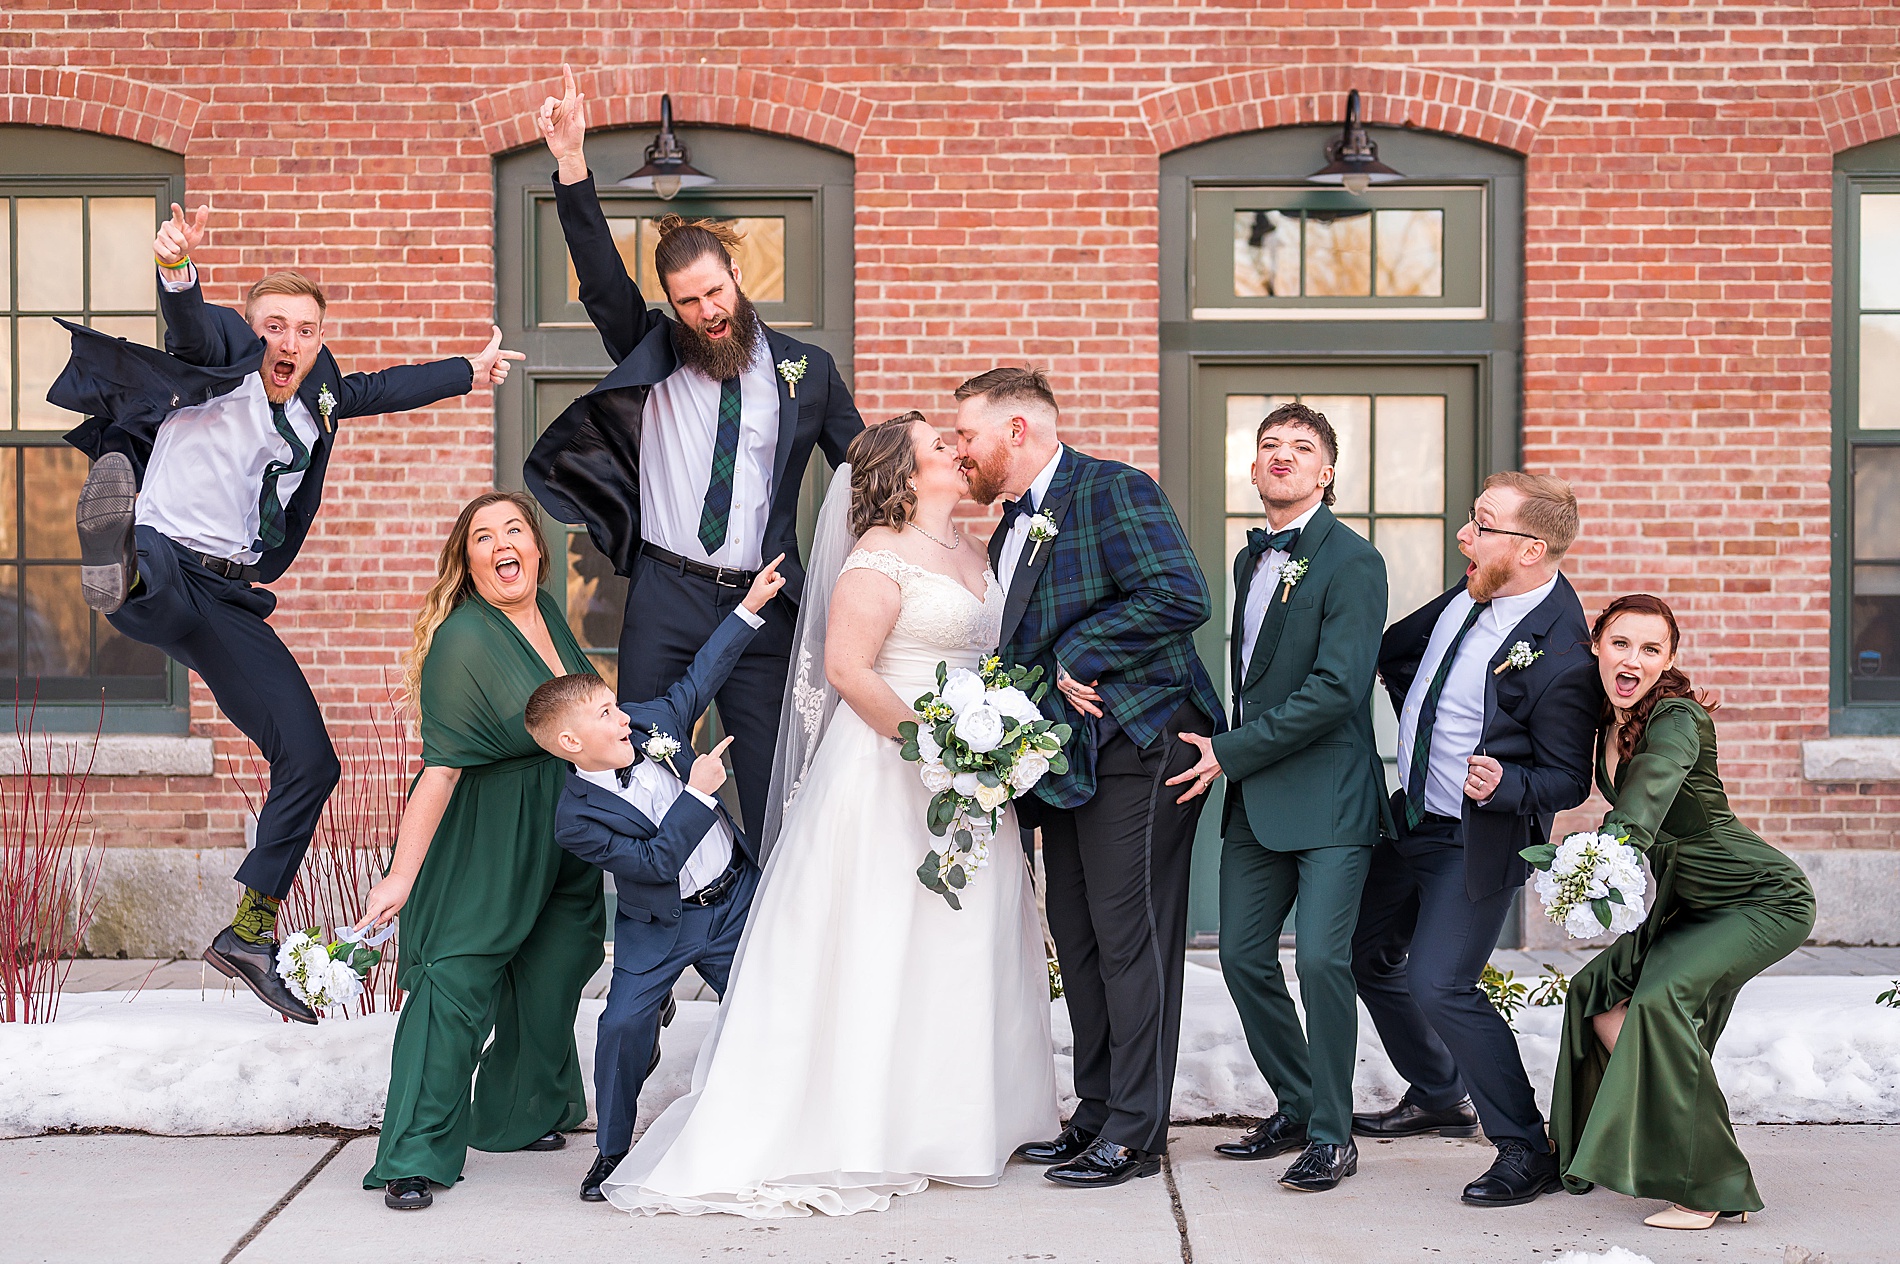 fun and candid wedding party portrait